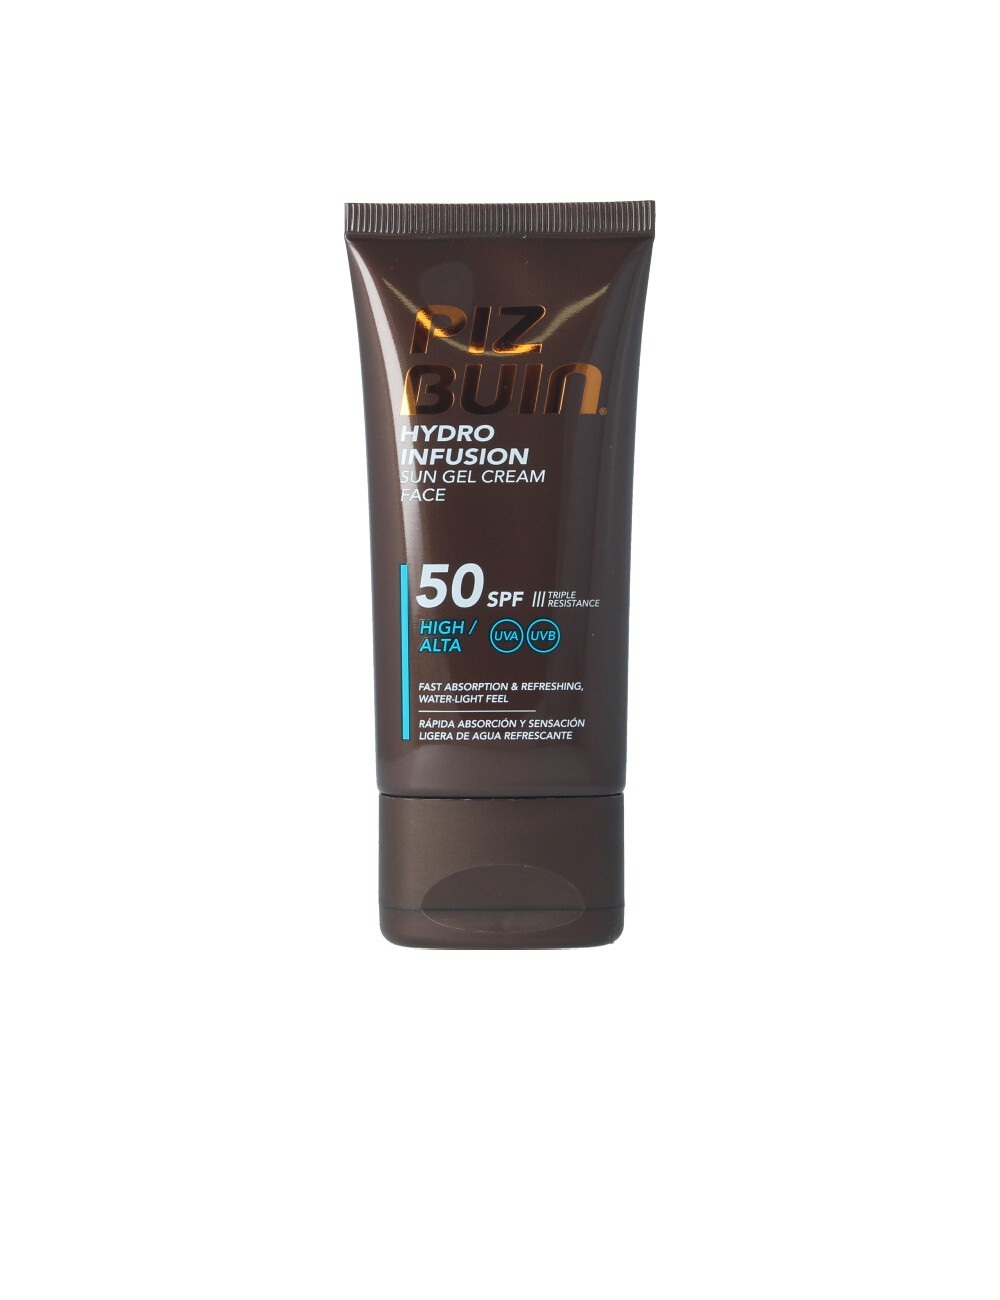 Gel crème solaire HYDRO INFUSION face SPF50 50 ml